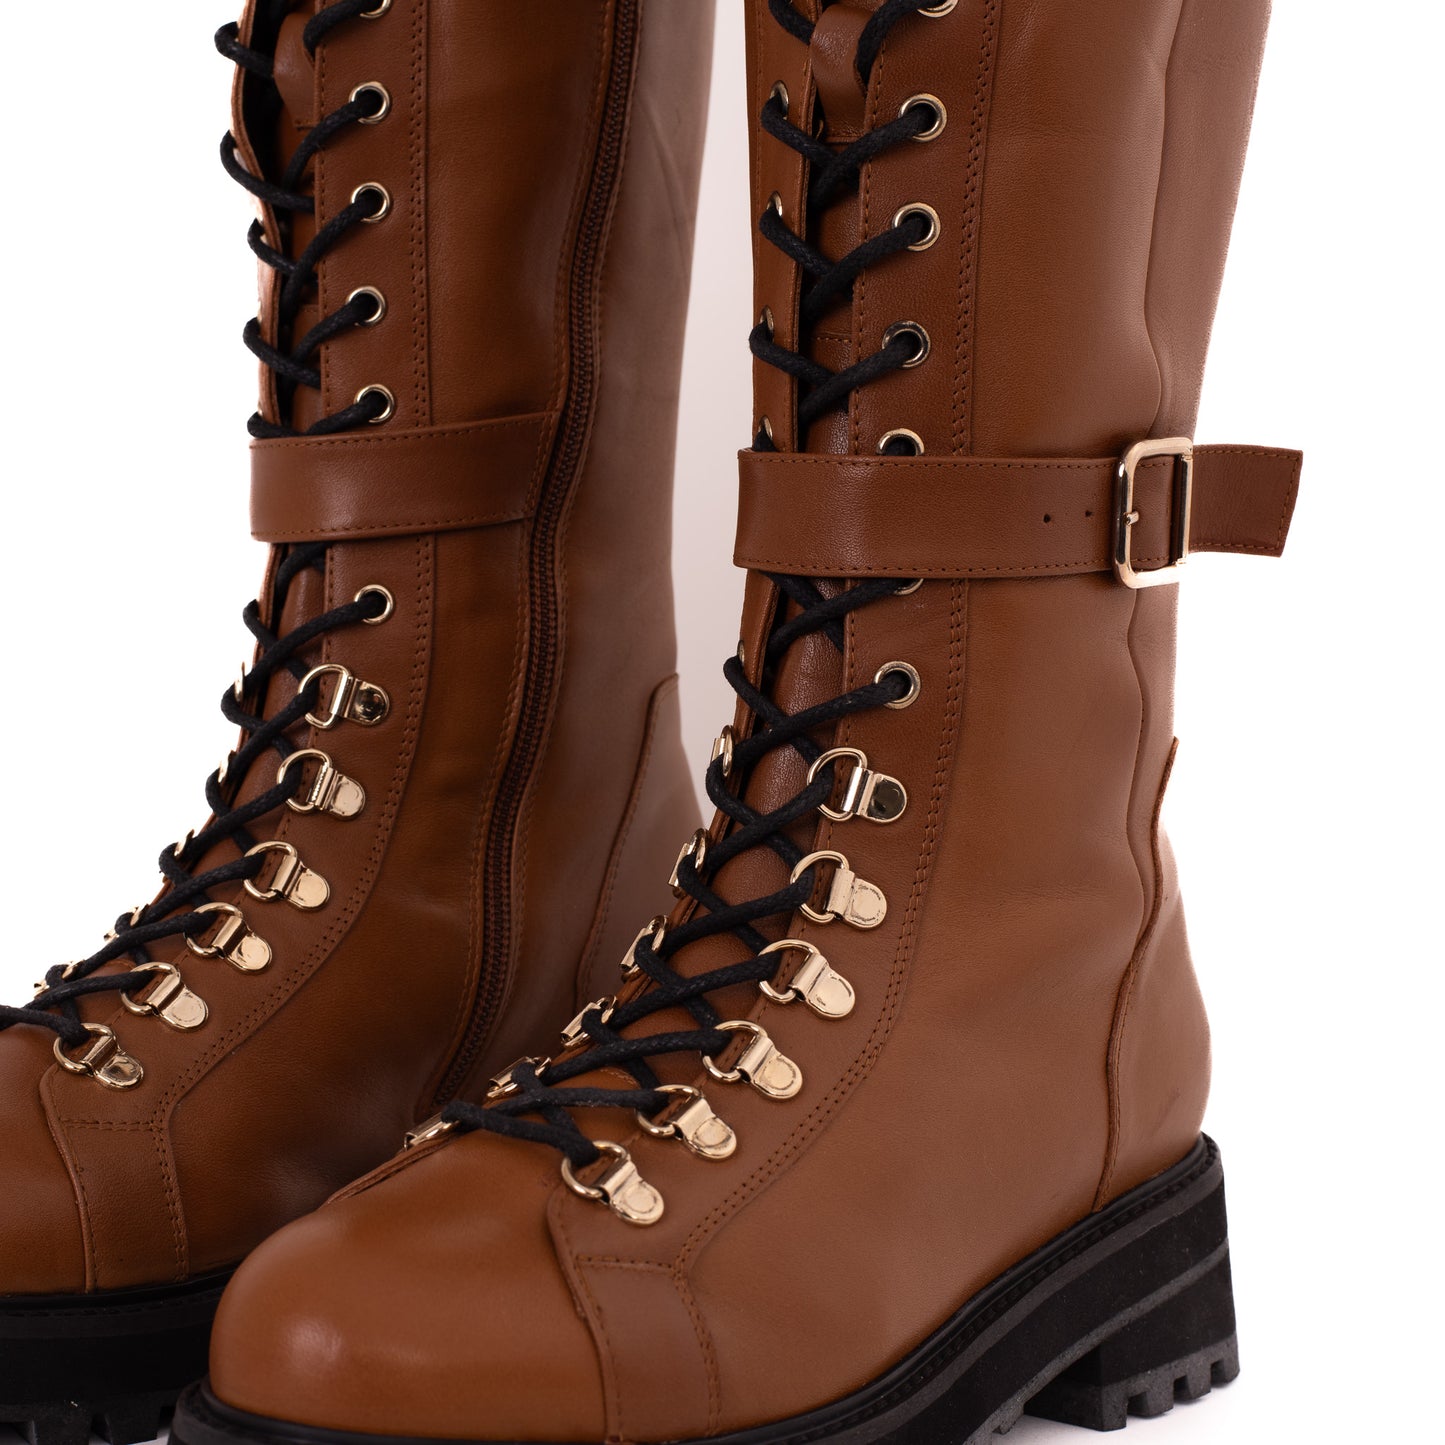 The Istinye Tan Leather Knee High Lace-Up Women Boot Limited Edition